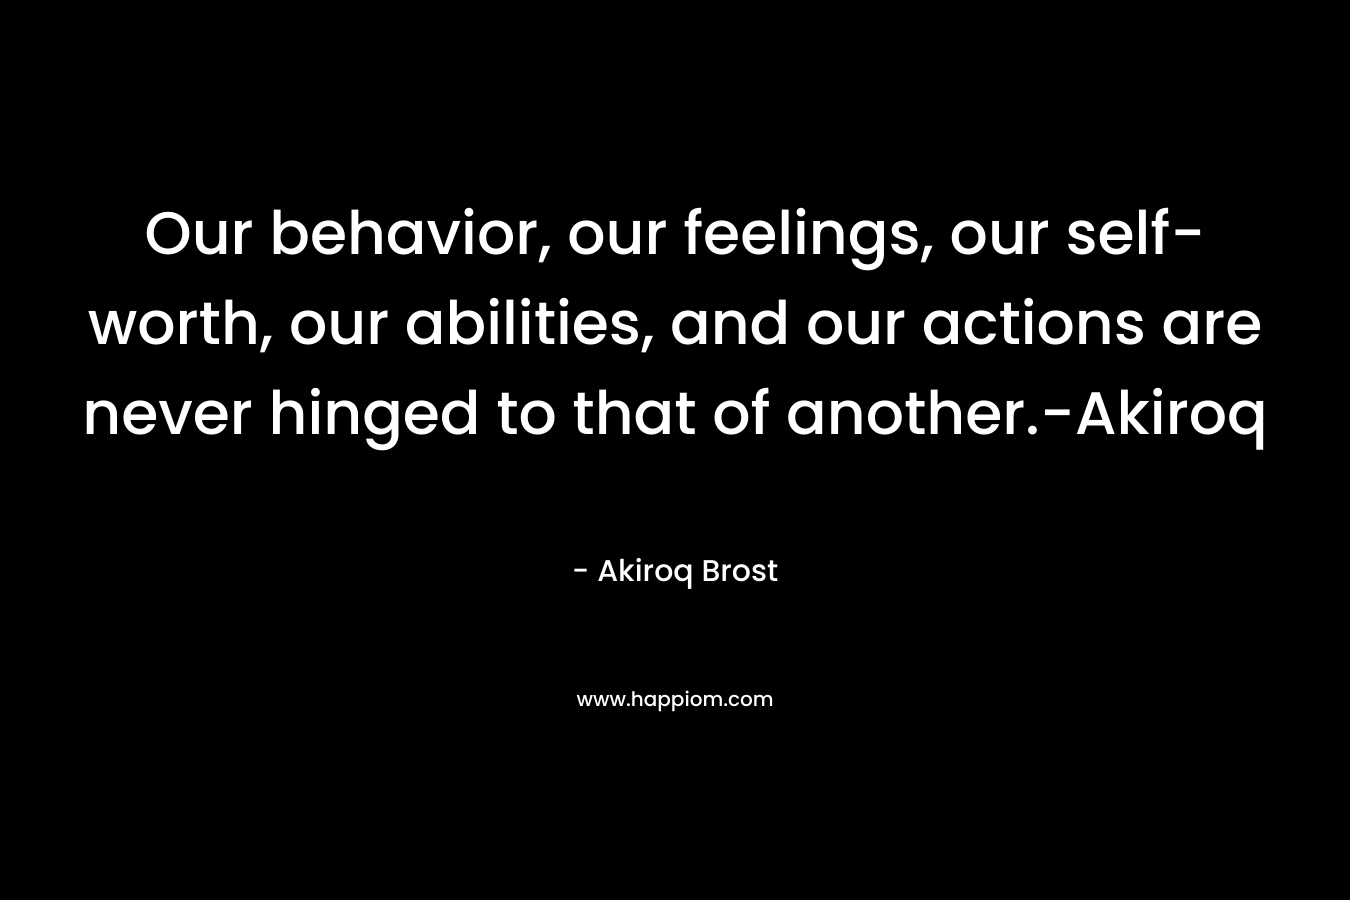 Our behavior, our feelings, our self-worth, our abilities, and our actions are never hinged to that of another.-Akiroq